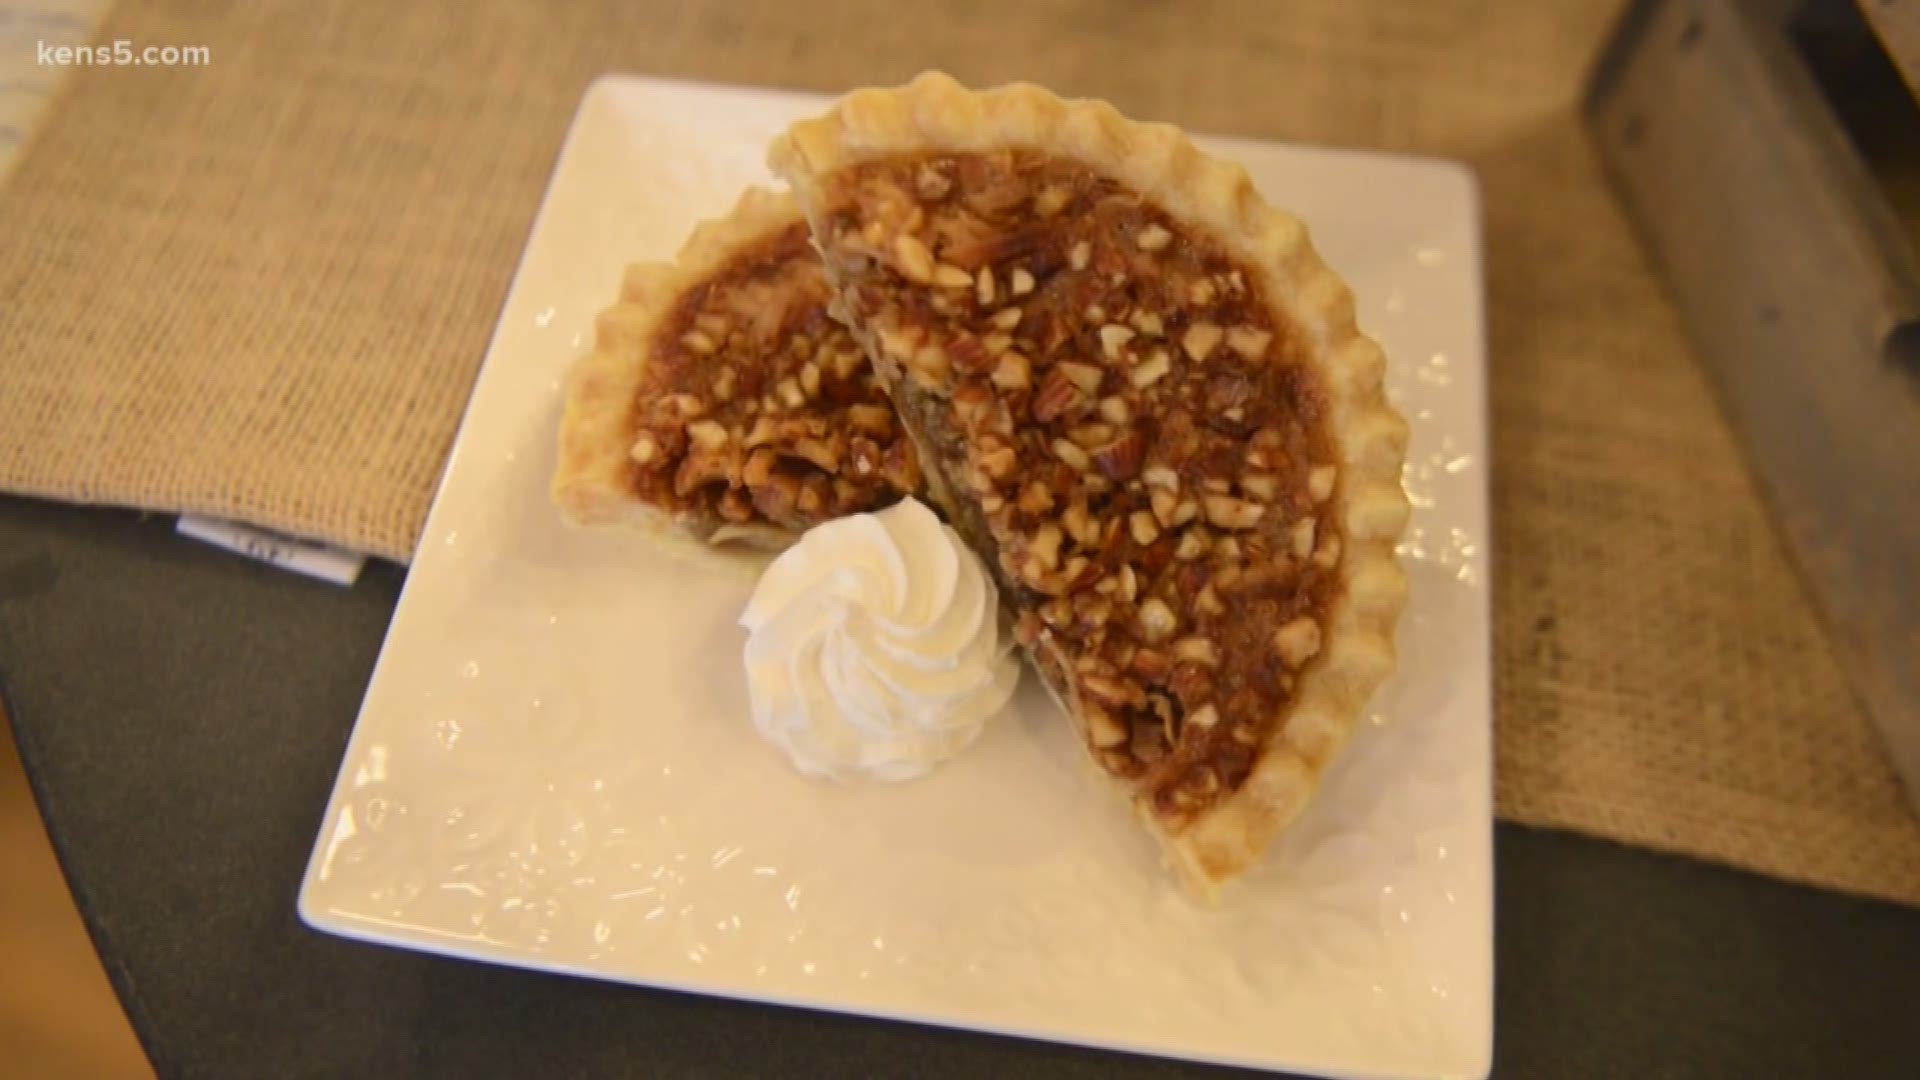 If you're looking for some pies to bring to the holiday table, Tootie Pie Company has some options.